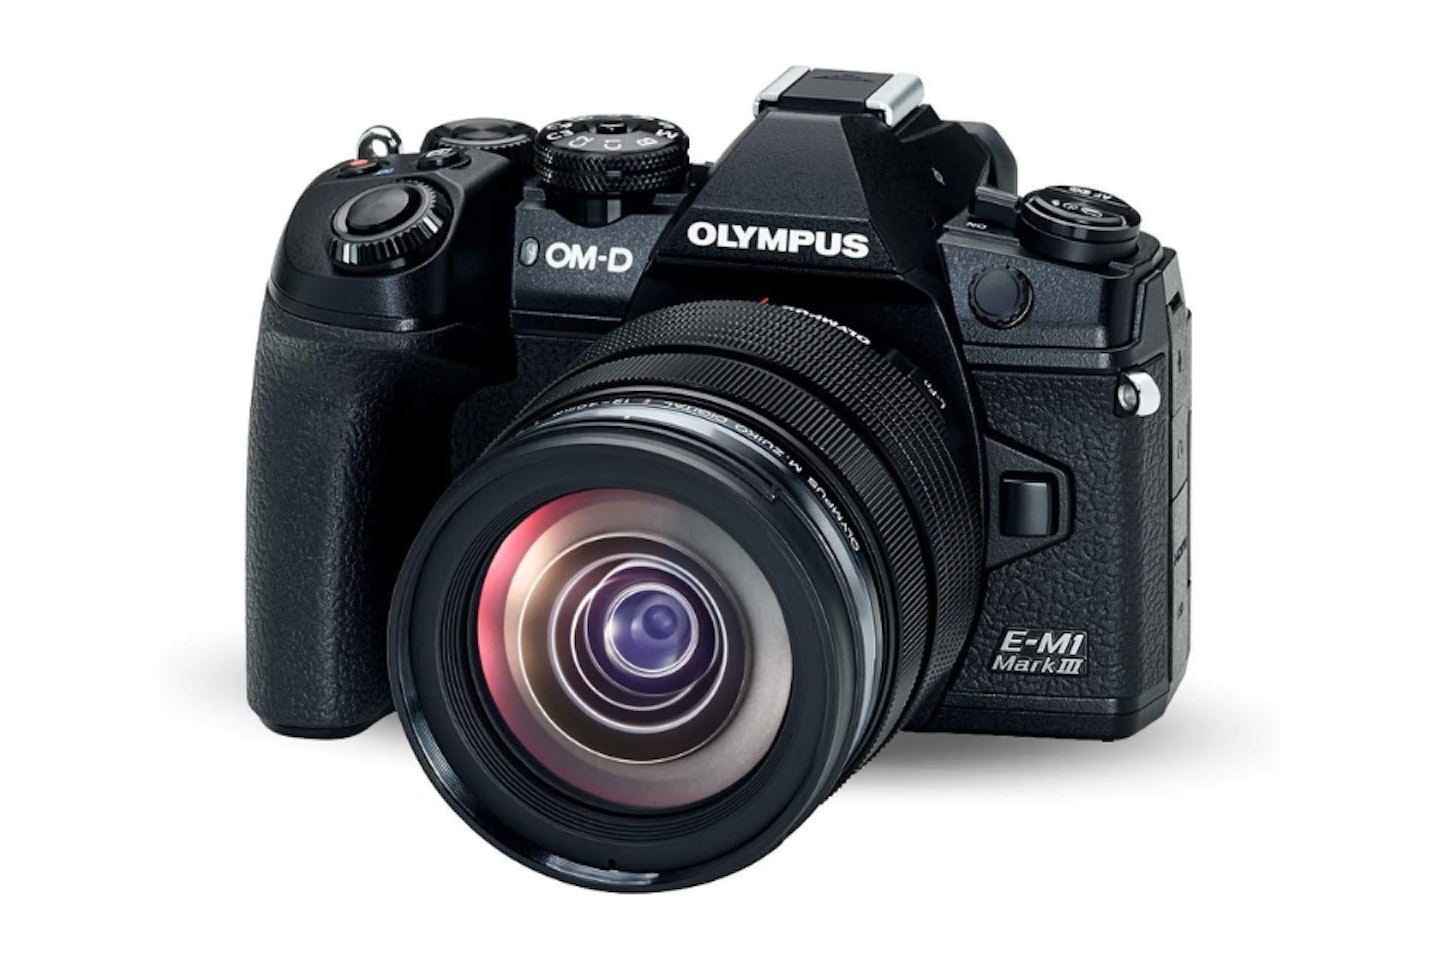 Olympus OM-D E-M1 Mark III - one of the best mirrorless cameras